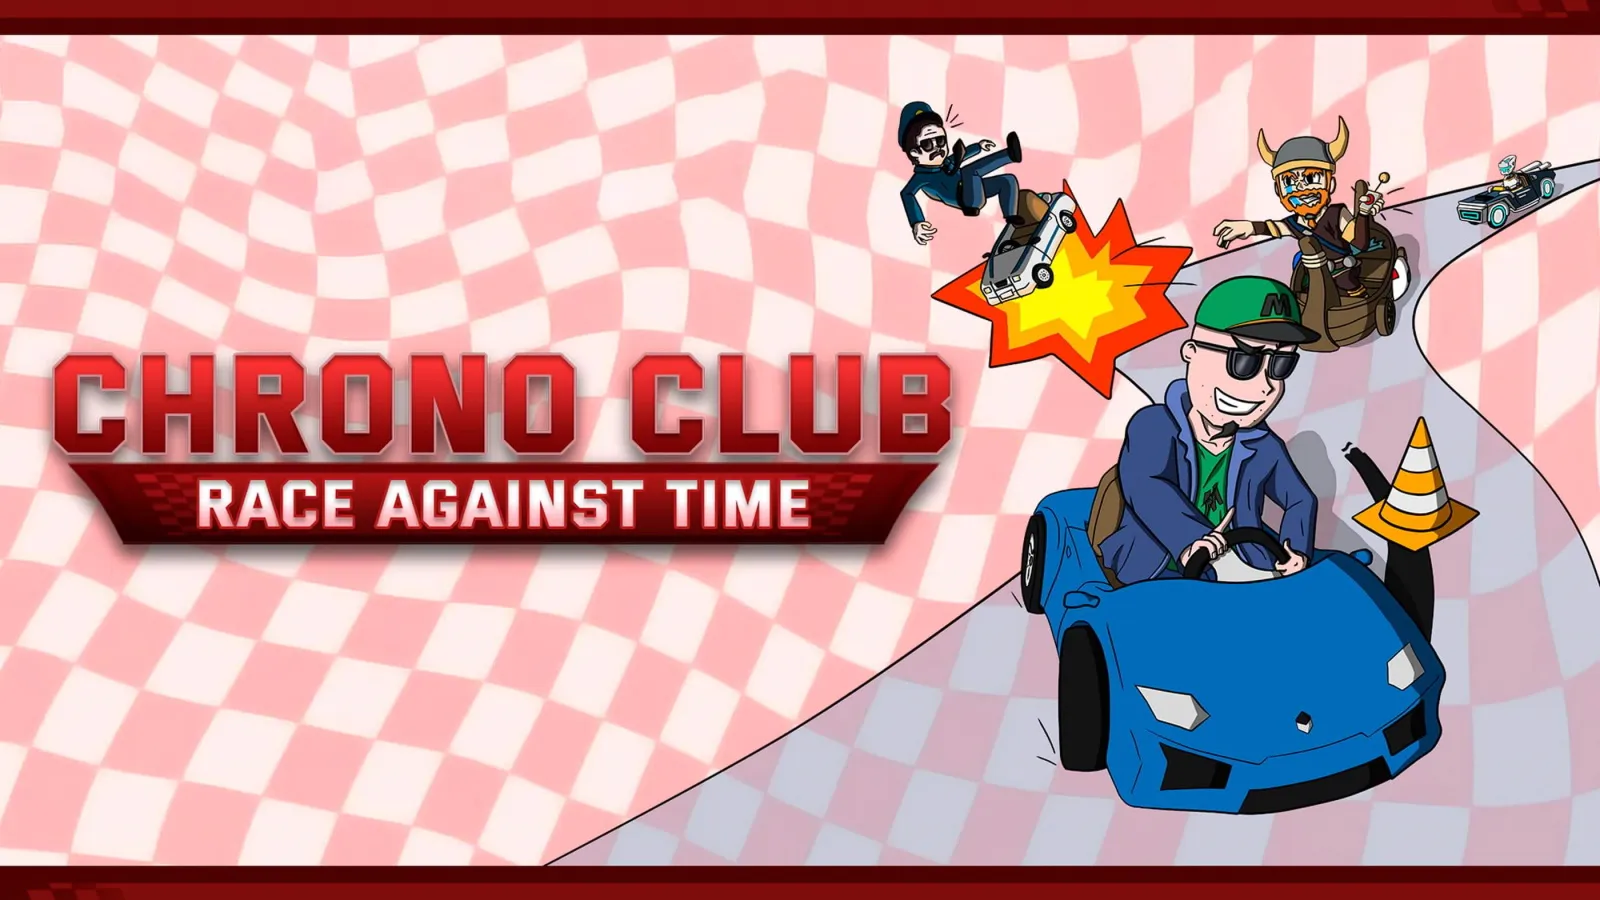 Cartoon banner for Chrono Club: Race Against Time with characters in various vehicles on a checkered background.